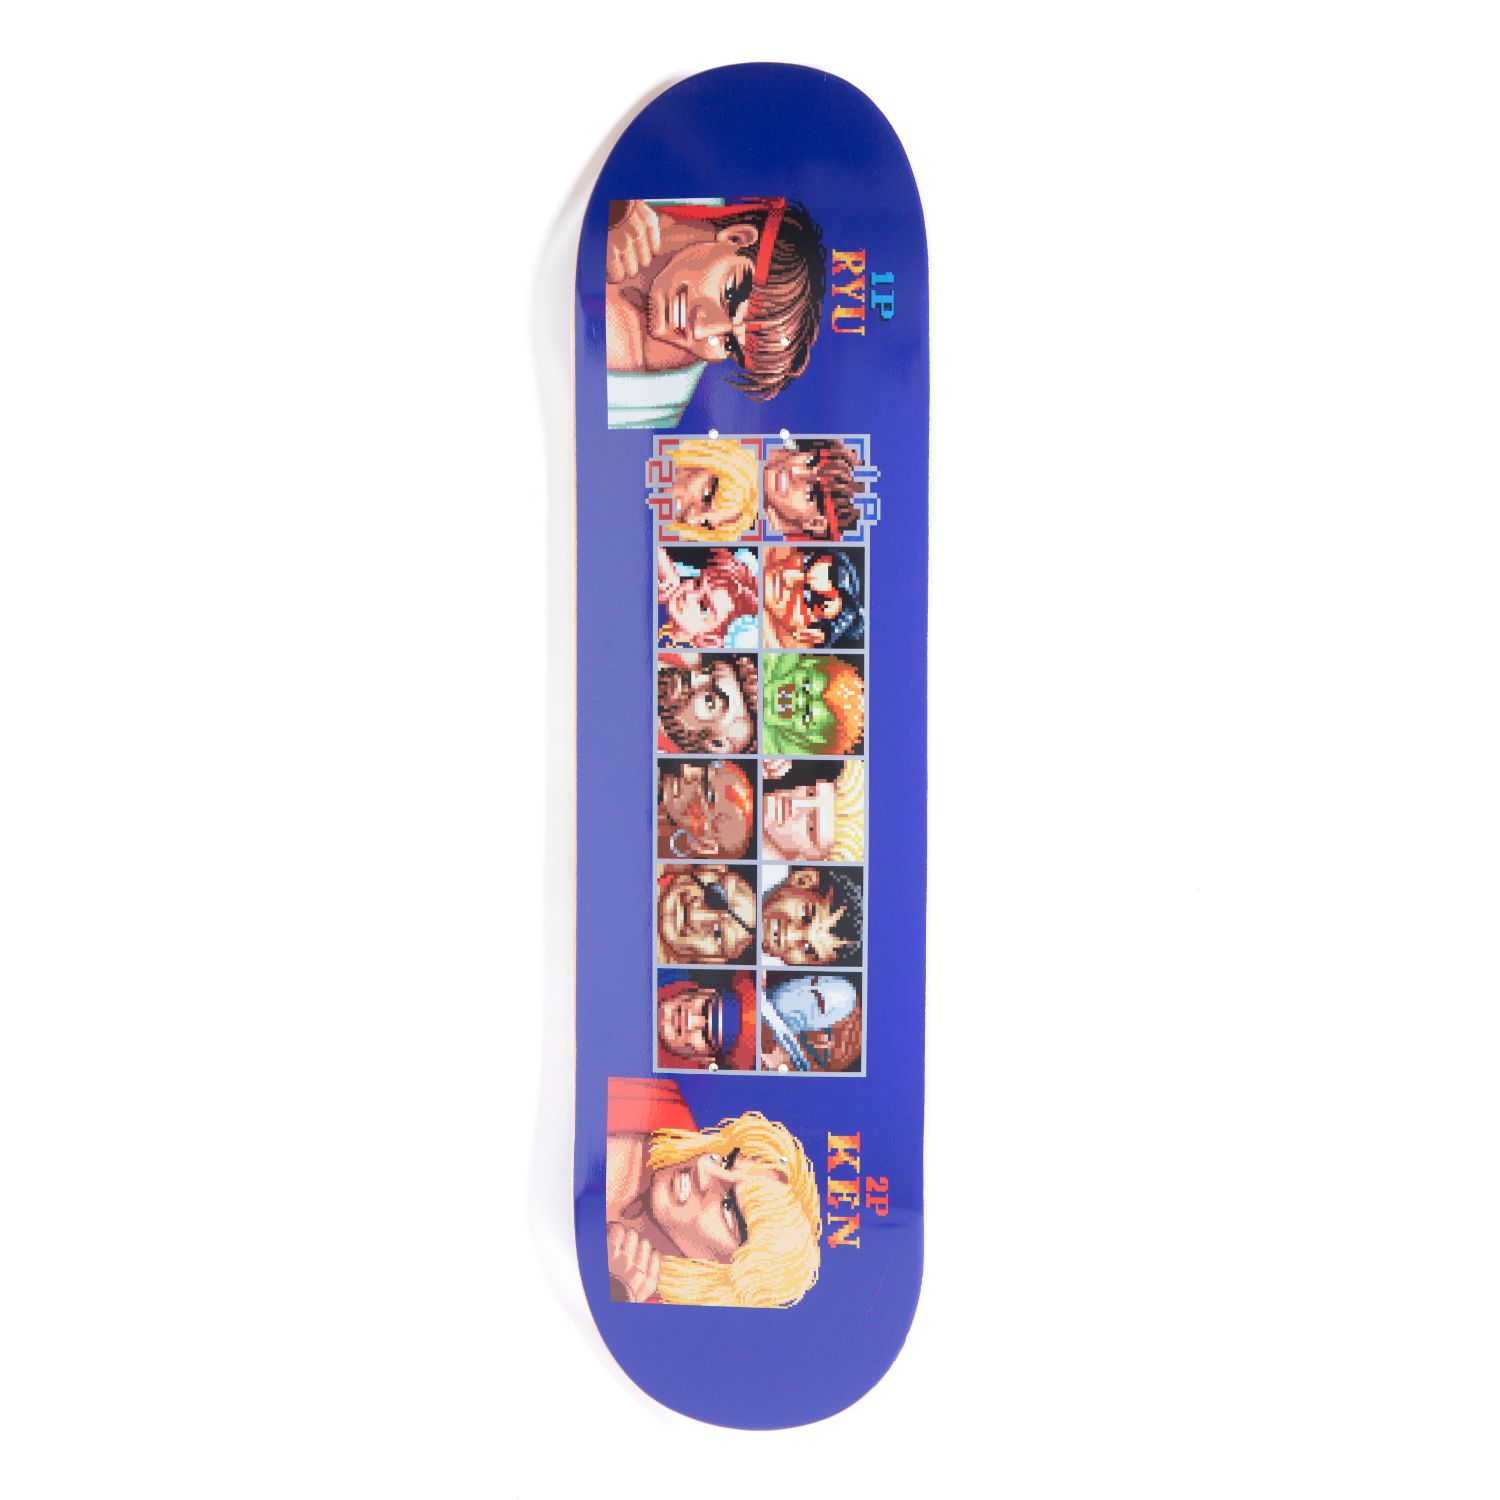 HUF x Streetfighter Player Select Deck 8.25" - Black